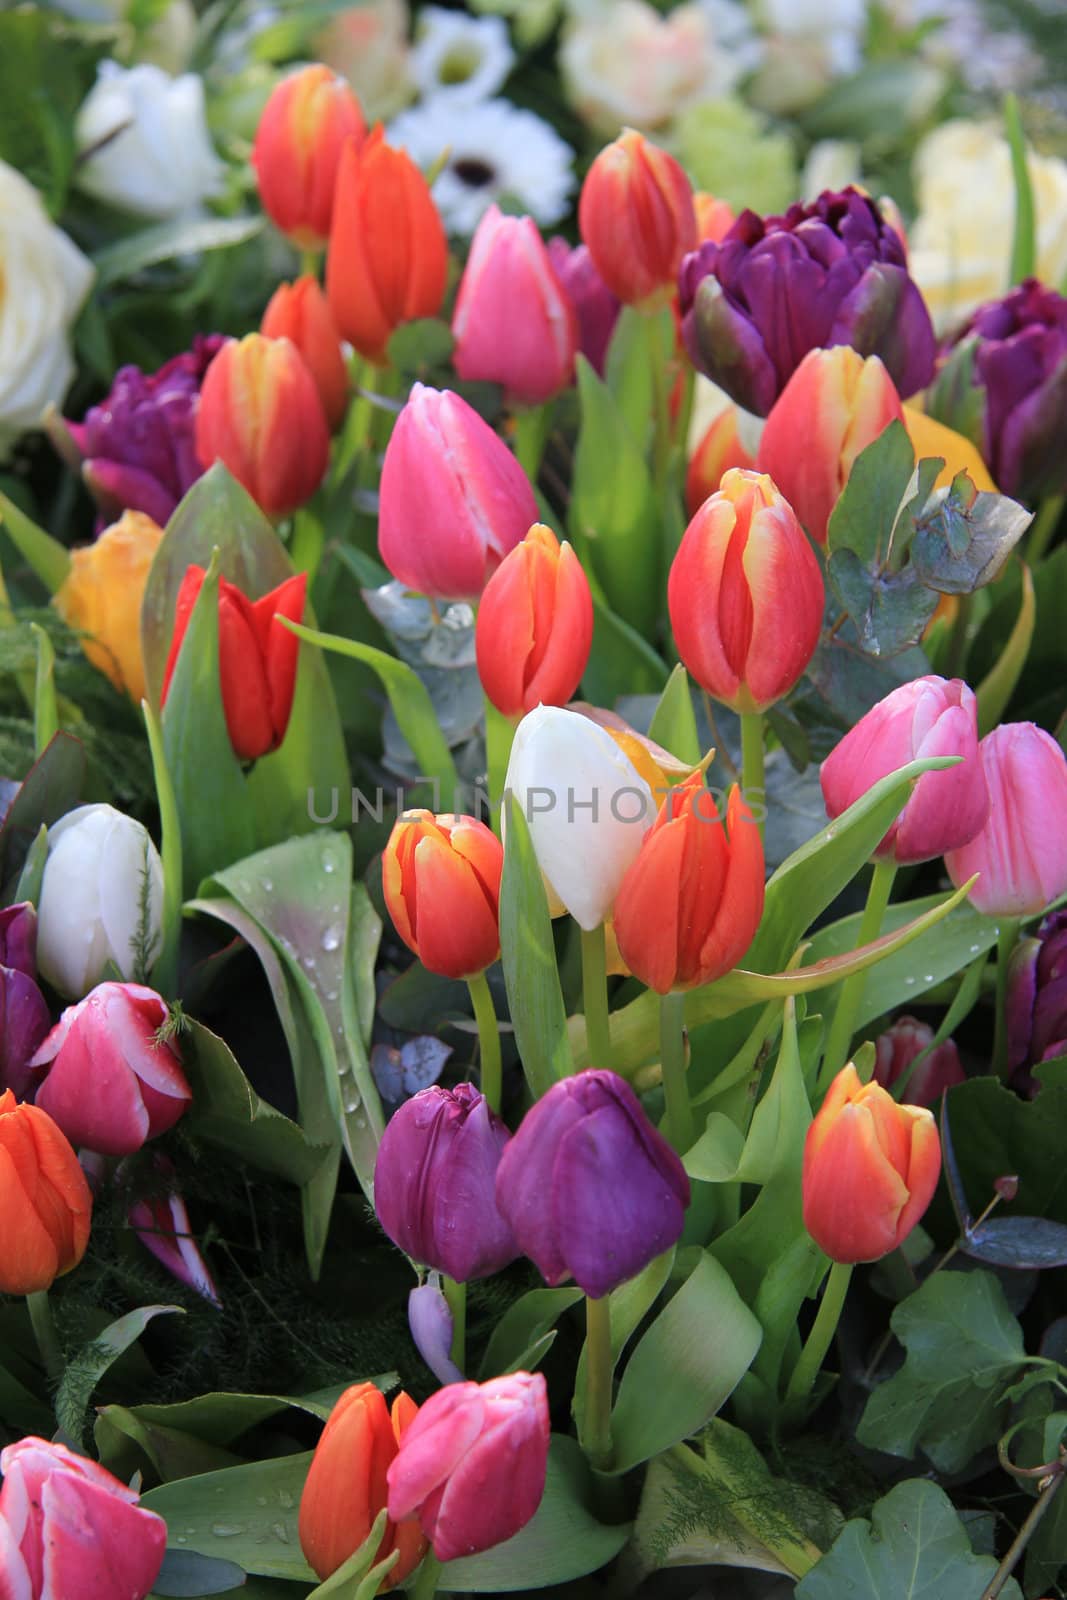 Colorful spring bouquet with tulips in various bright colors